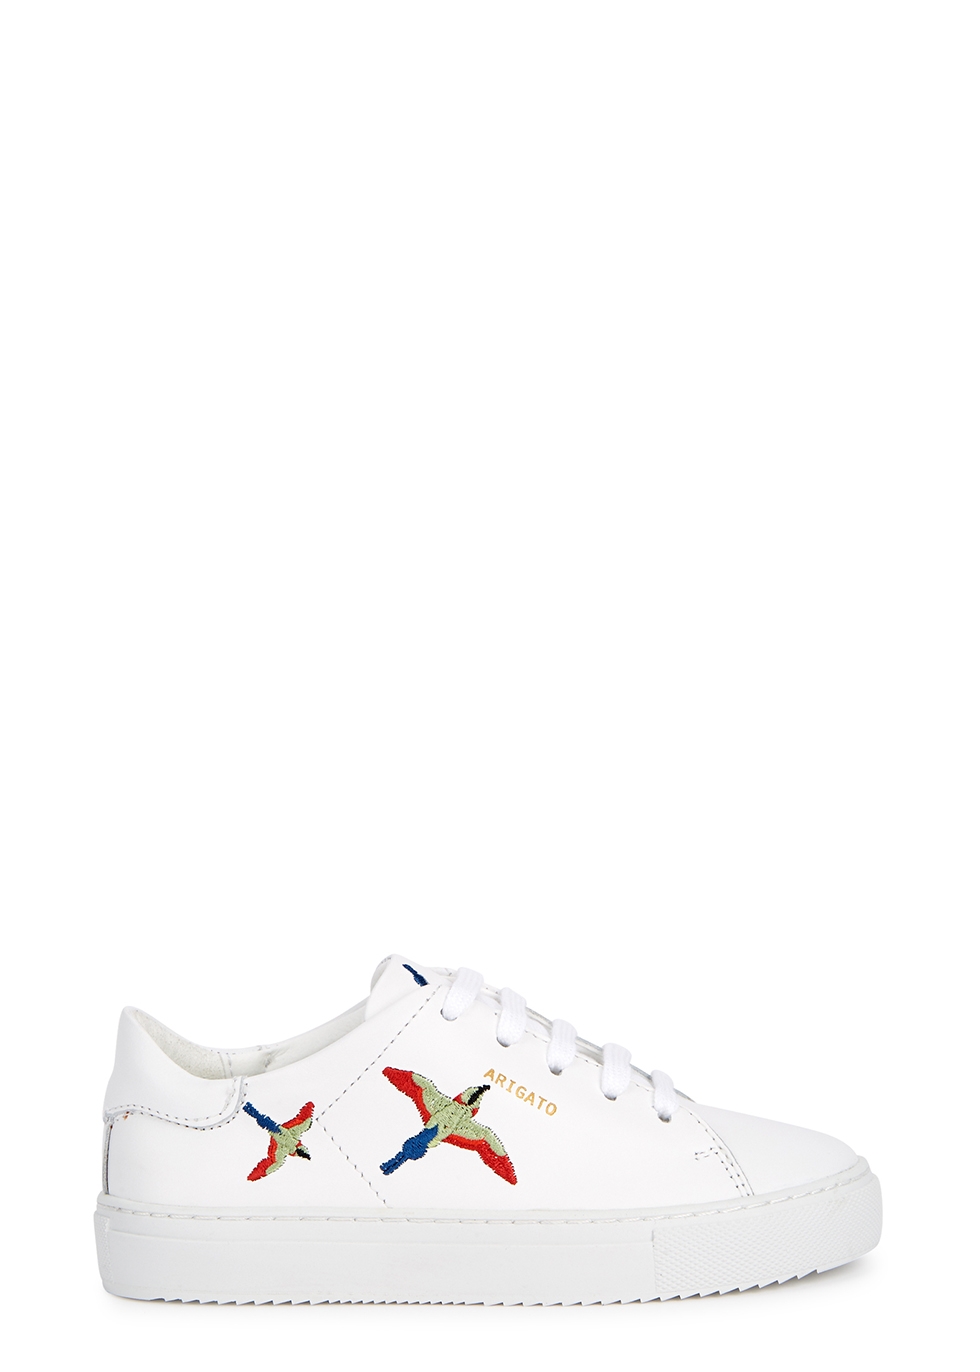 KIDS Clean 90 white embroidered leather sneakers